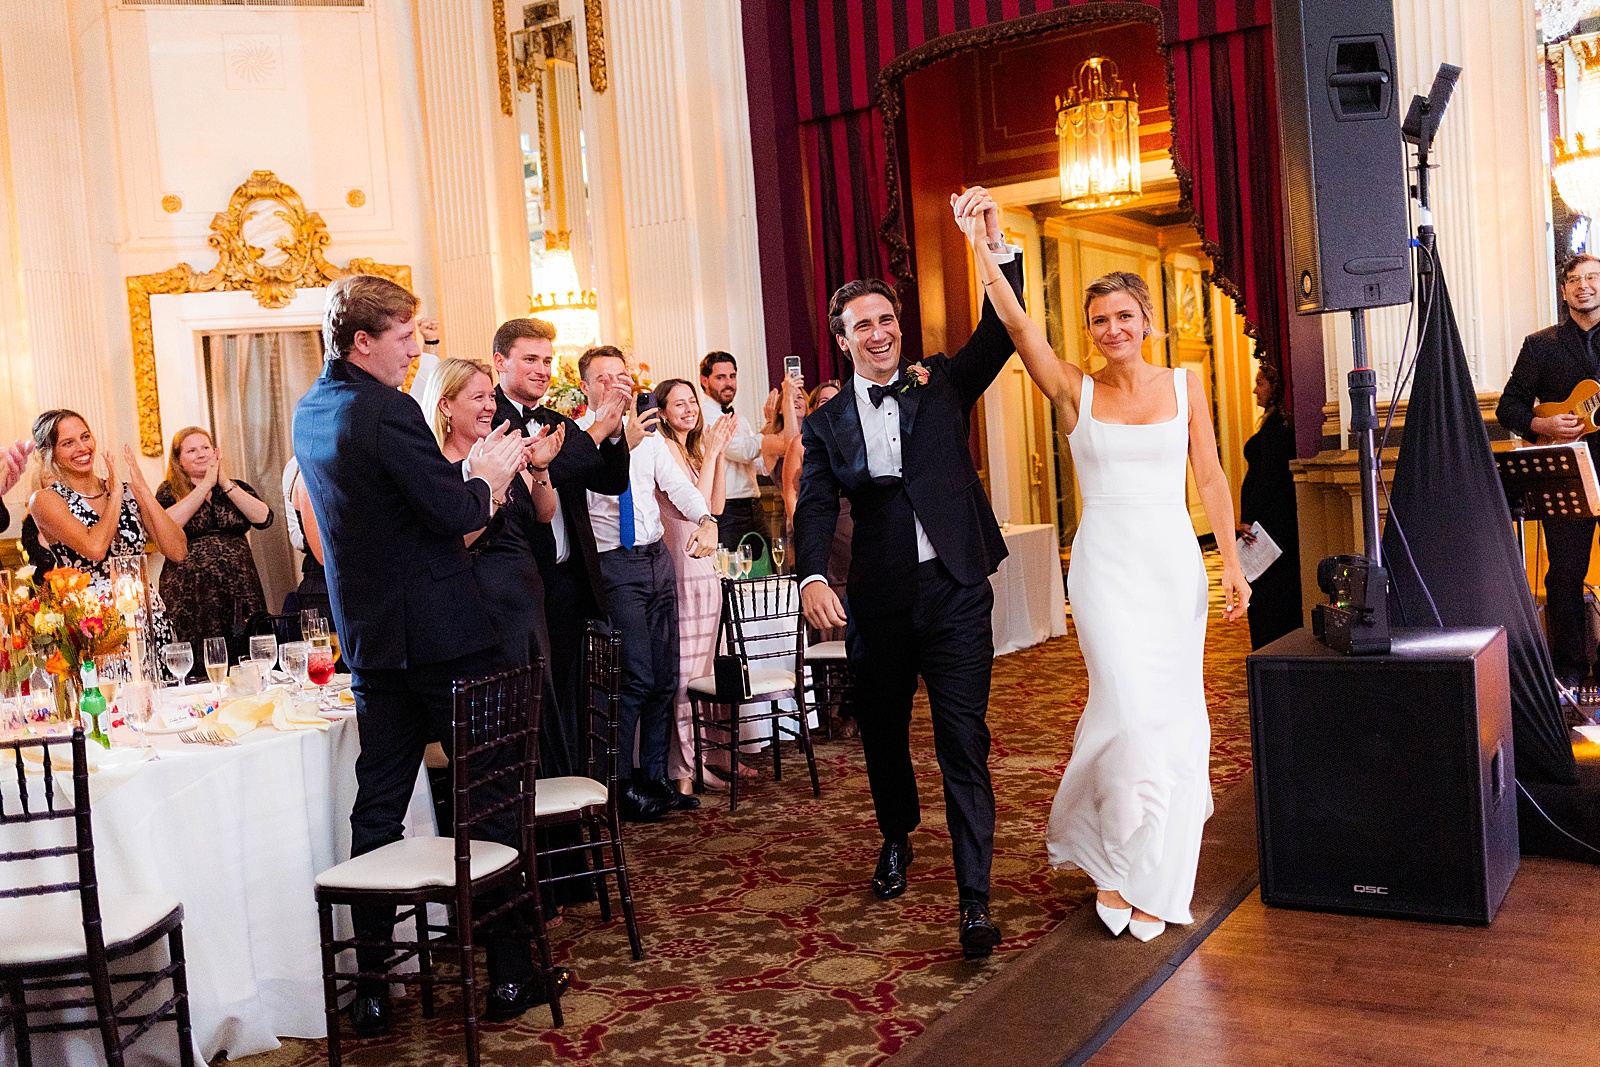 Bride and groom enter reception to crowd clapping